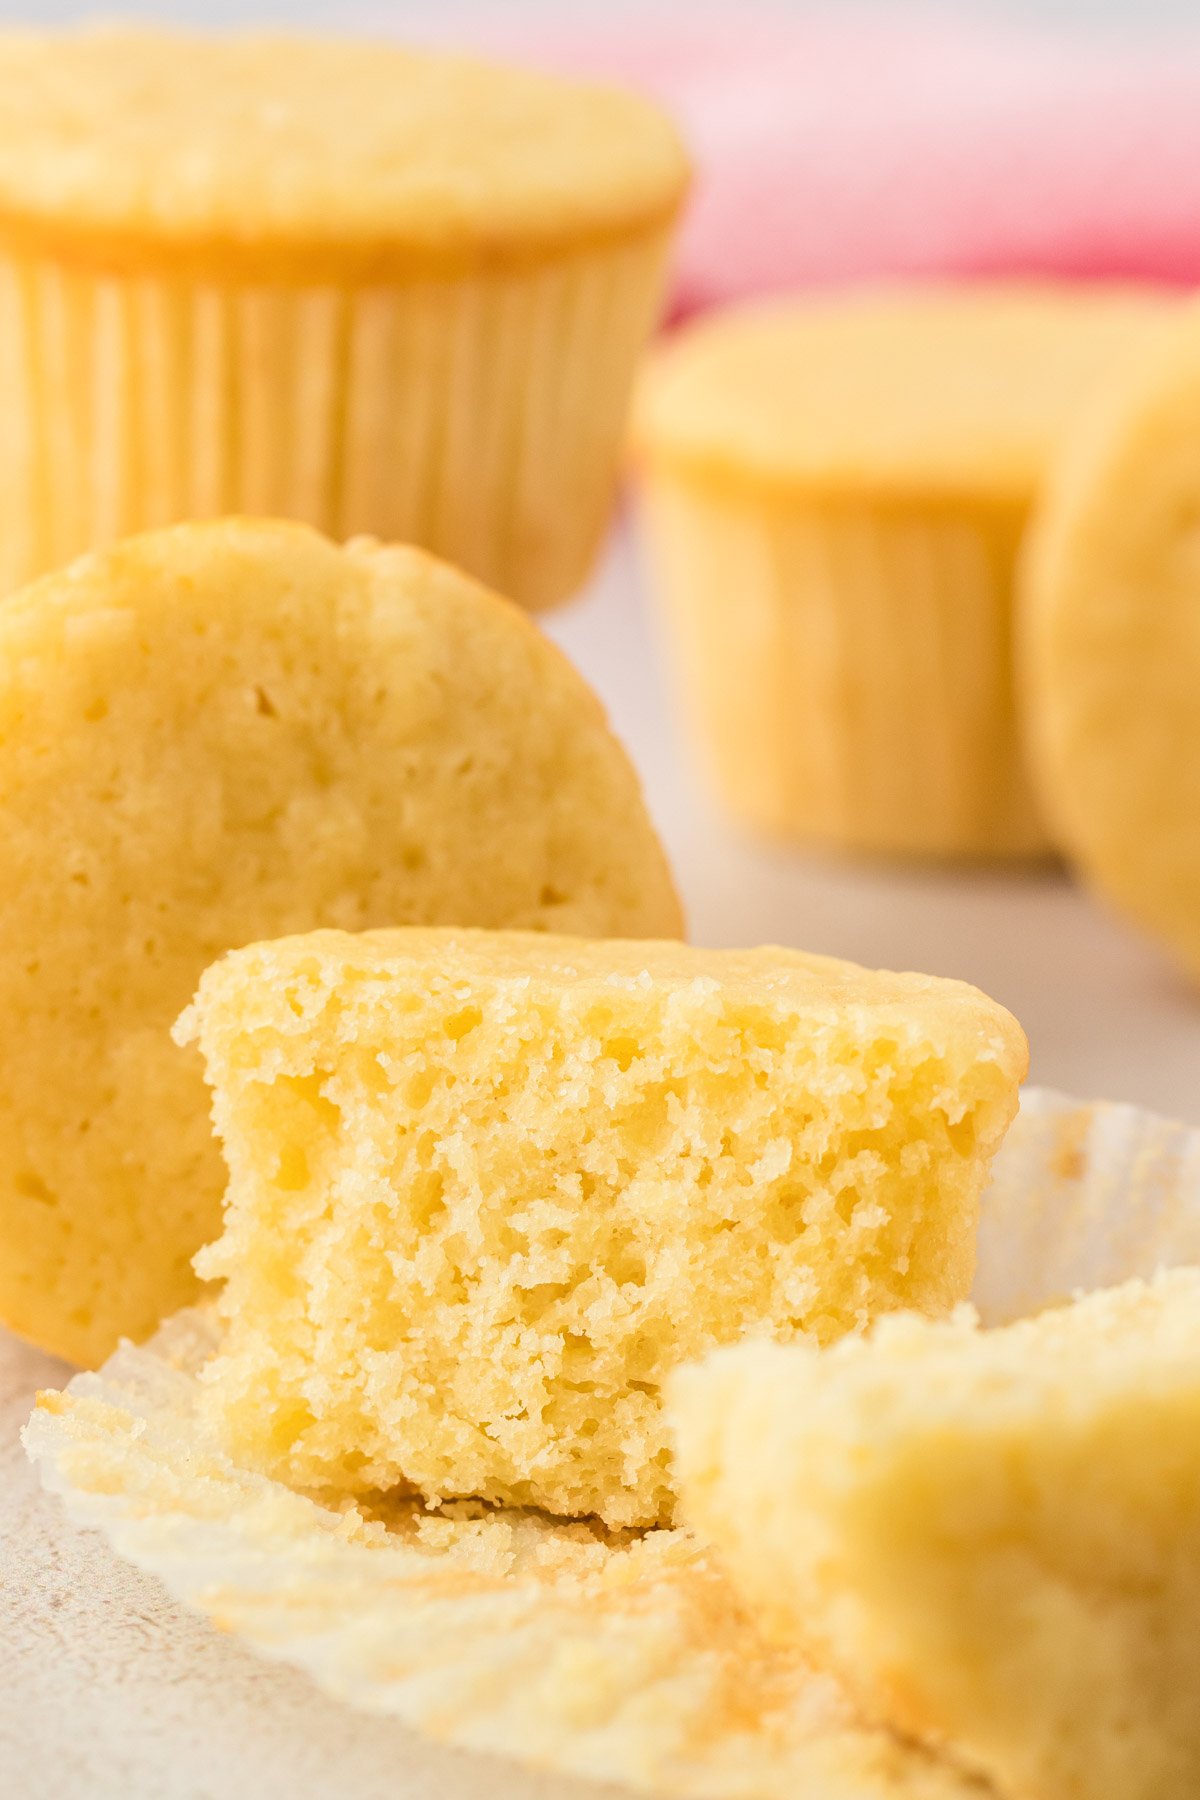 A plain yellow cupcake cut in half to reveal texture. Other cupcakes in the background.